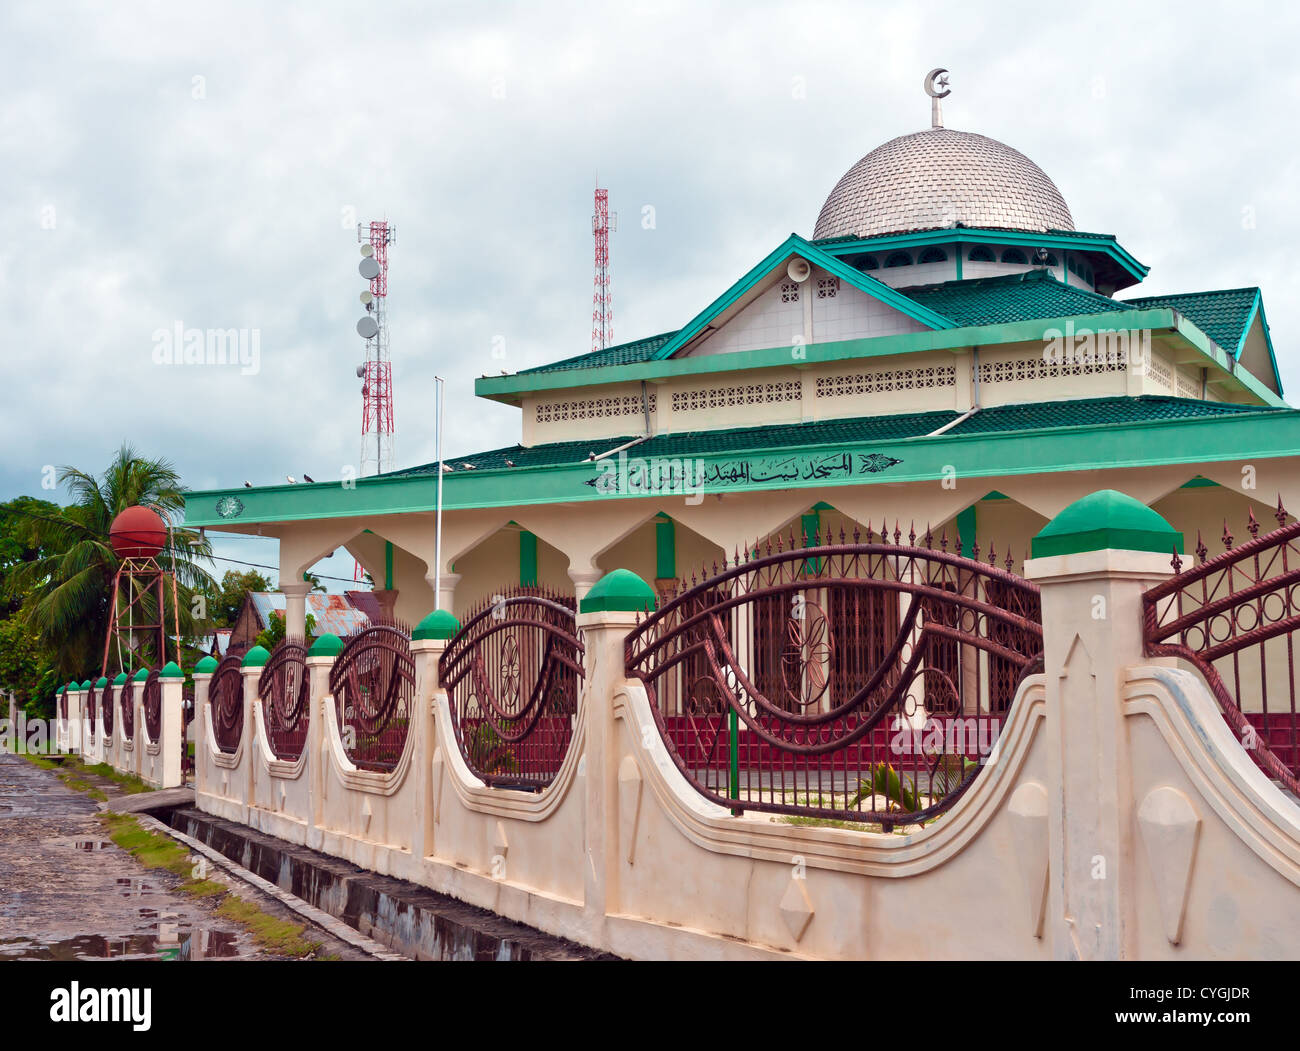 View of islamic mosque on a remote tropical island Stock Photo